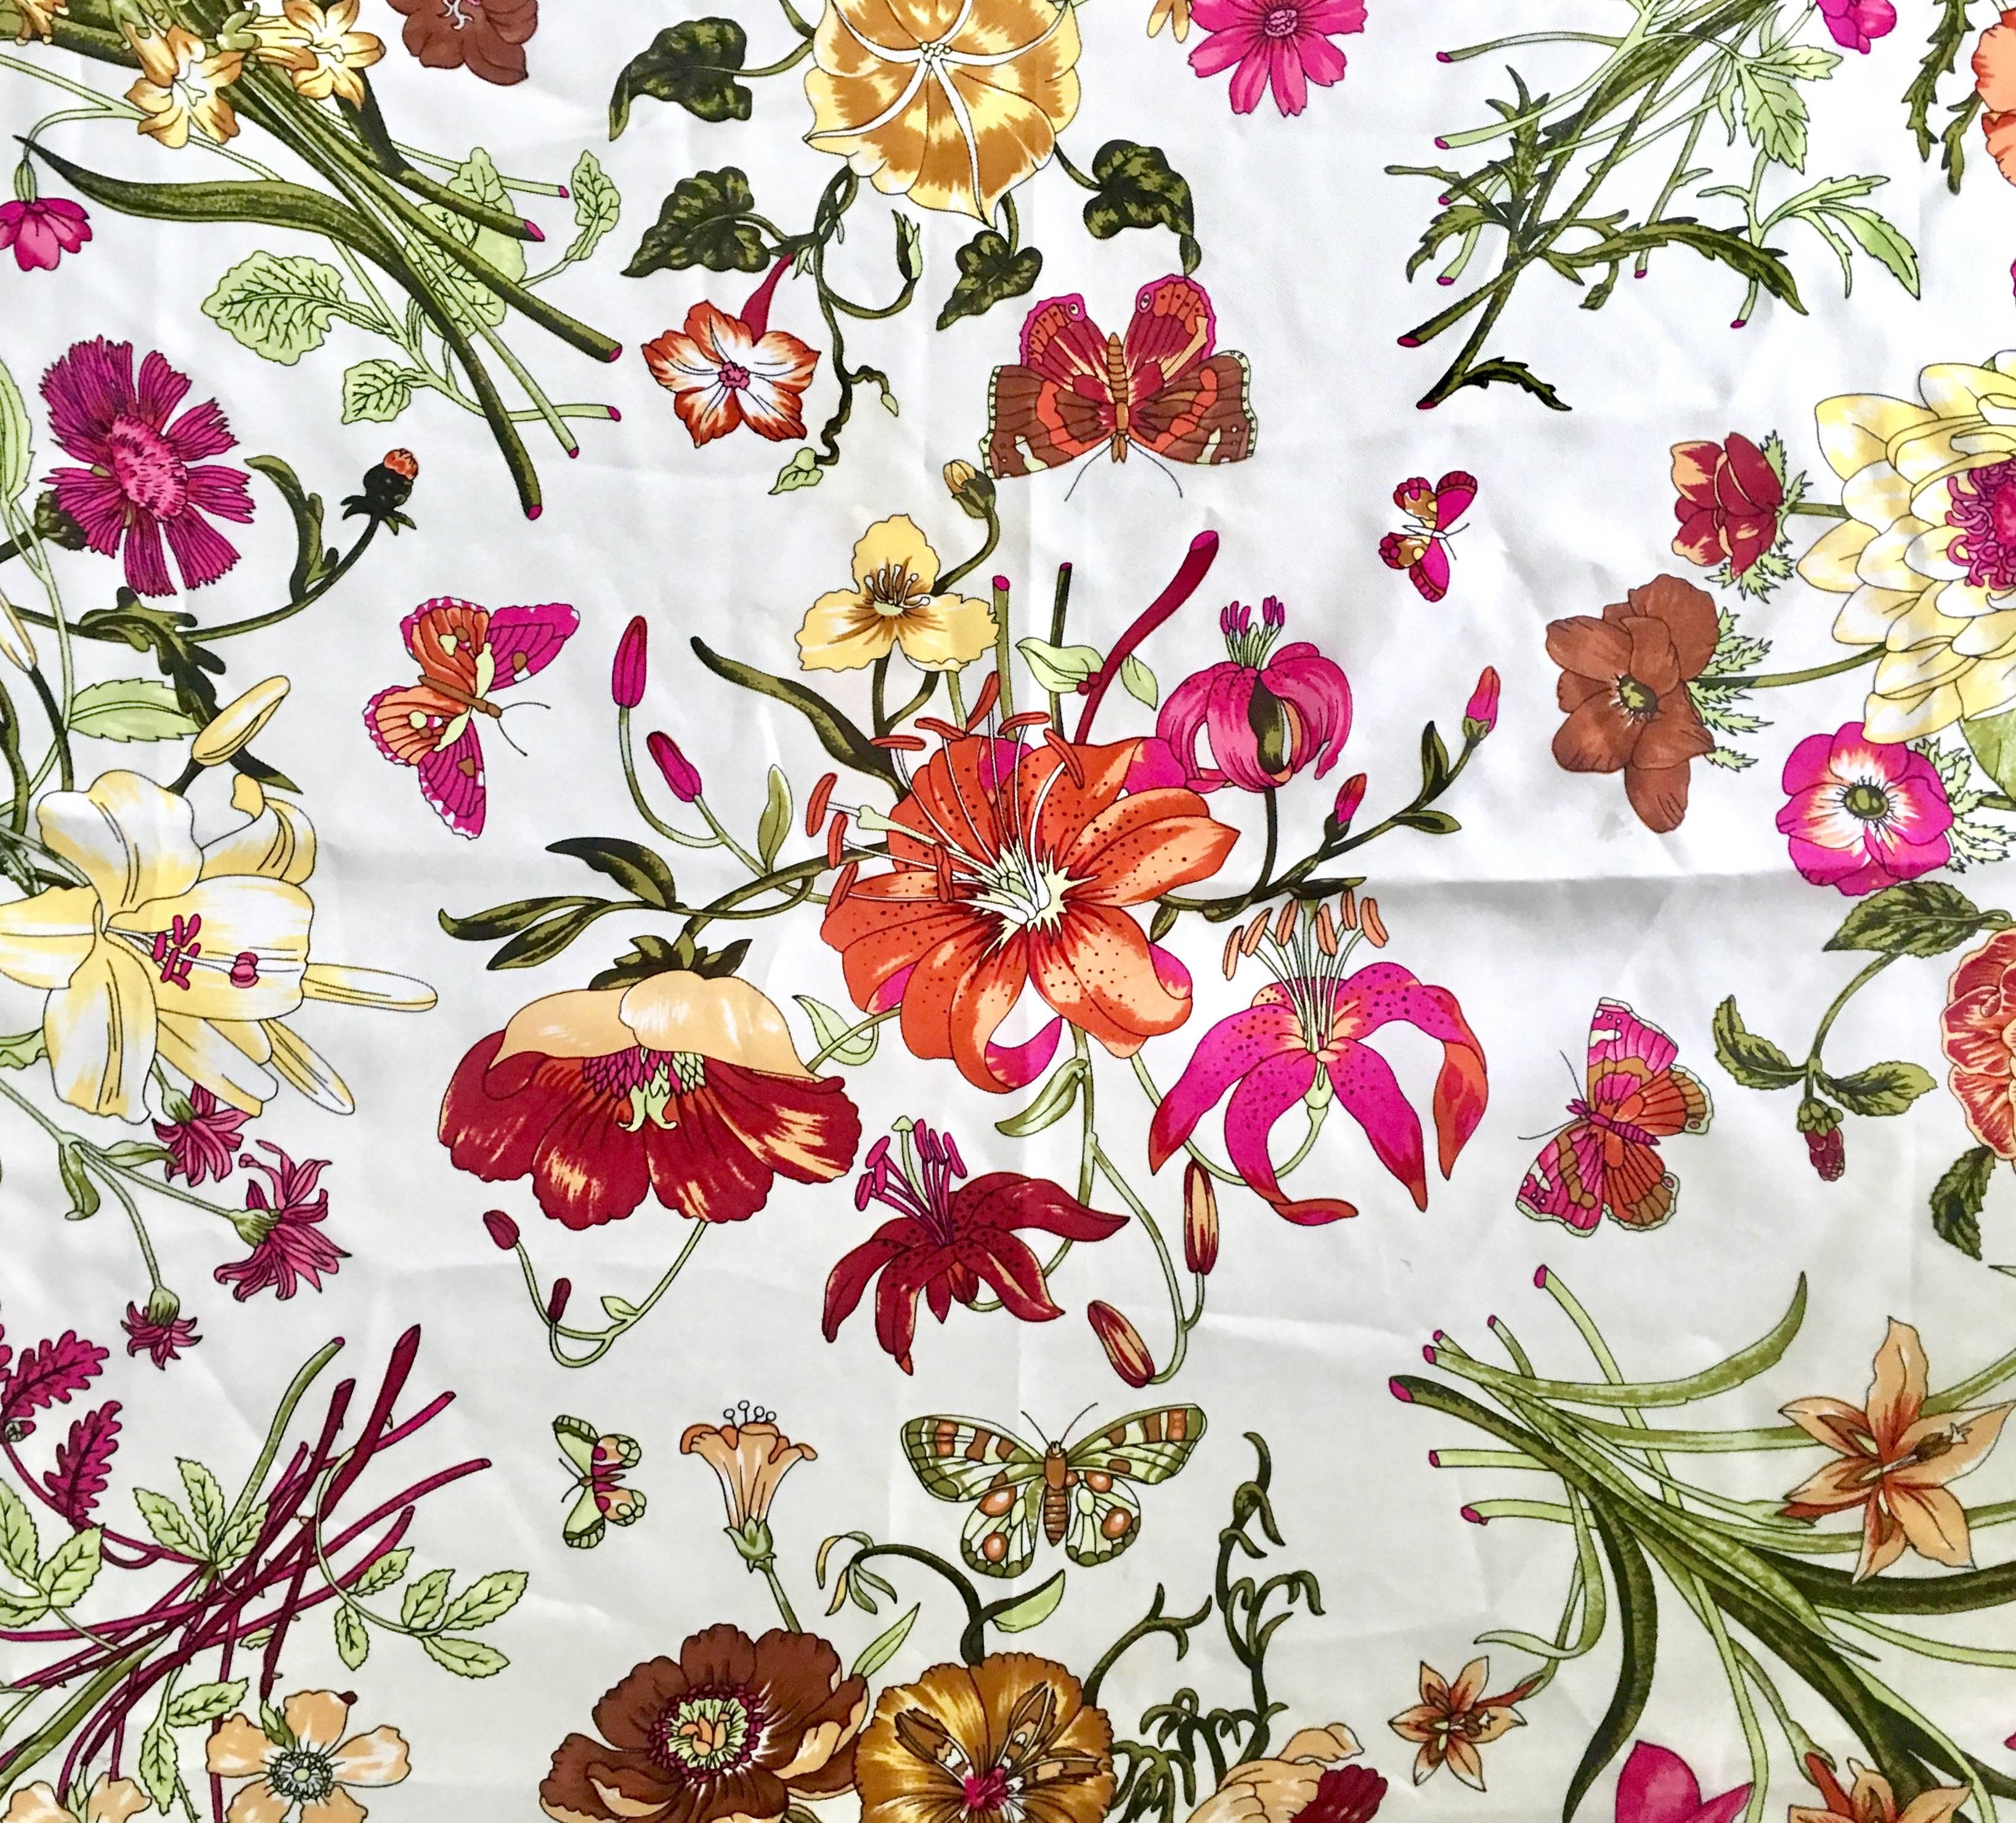 Vintage Gucci Style Marigold Floral Silk Scarf-Italy. Features the iconic Gucci style floral print on a white ground with hand rolled edge and marigold border. Manufacturers tag present and reads 100% silk, Made In Italy.
Size, 34" square.
